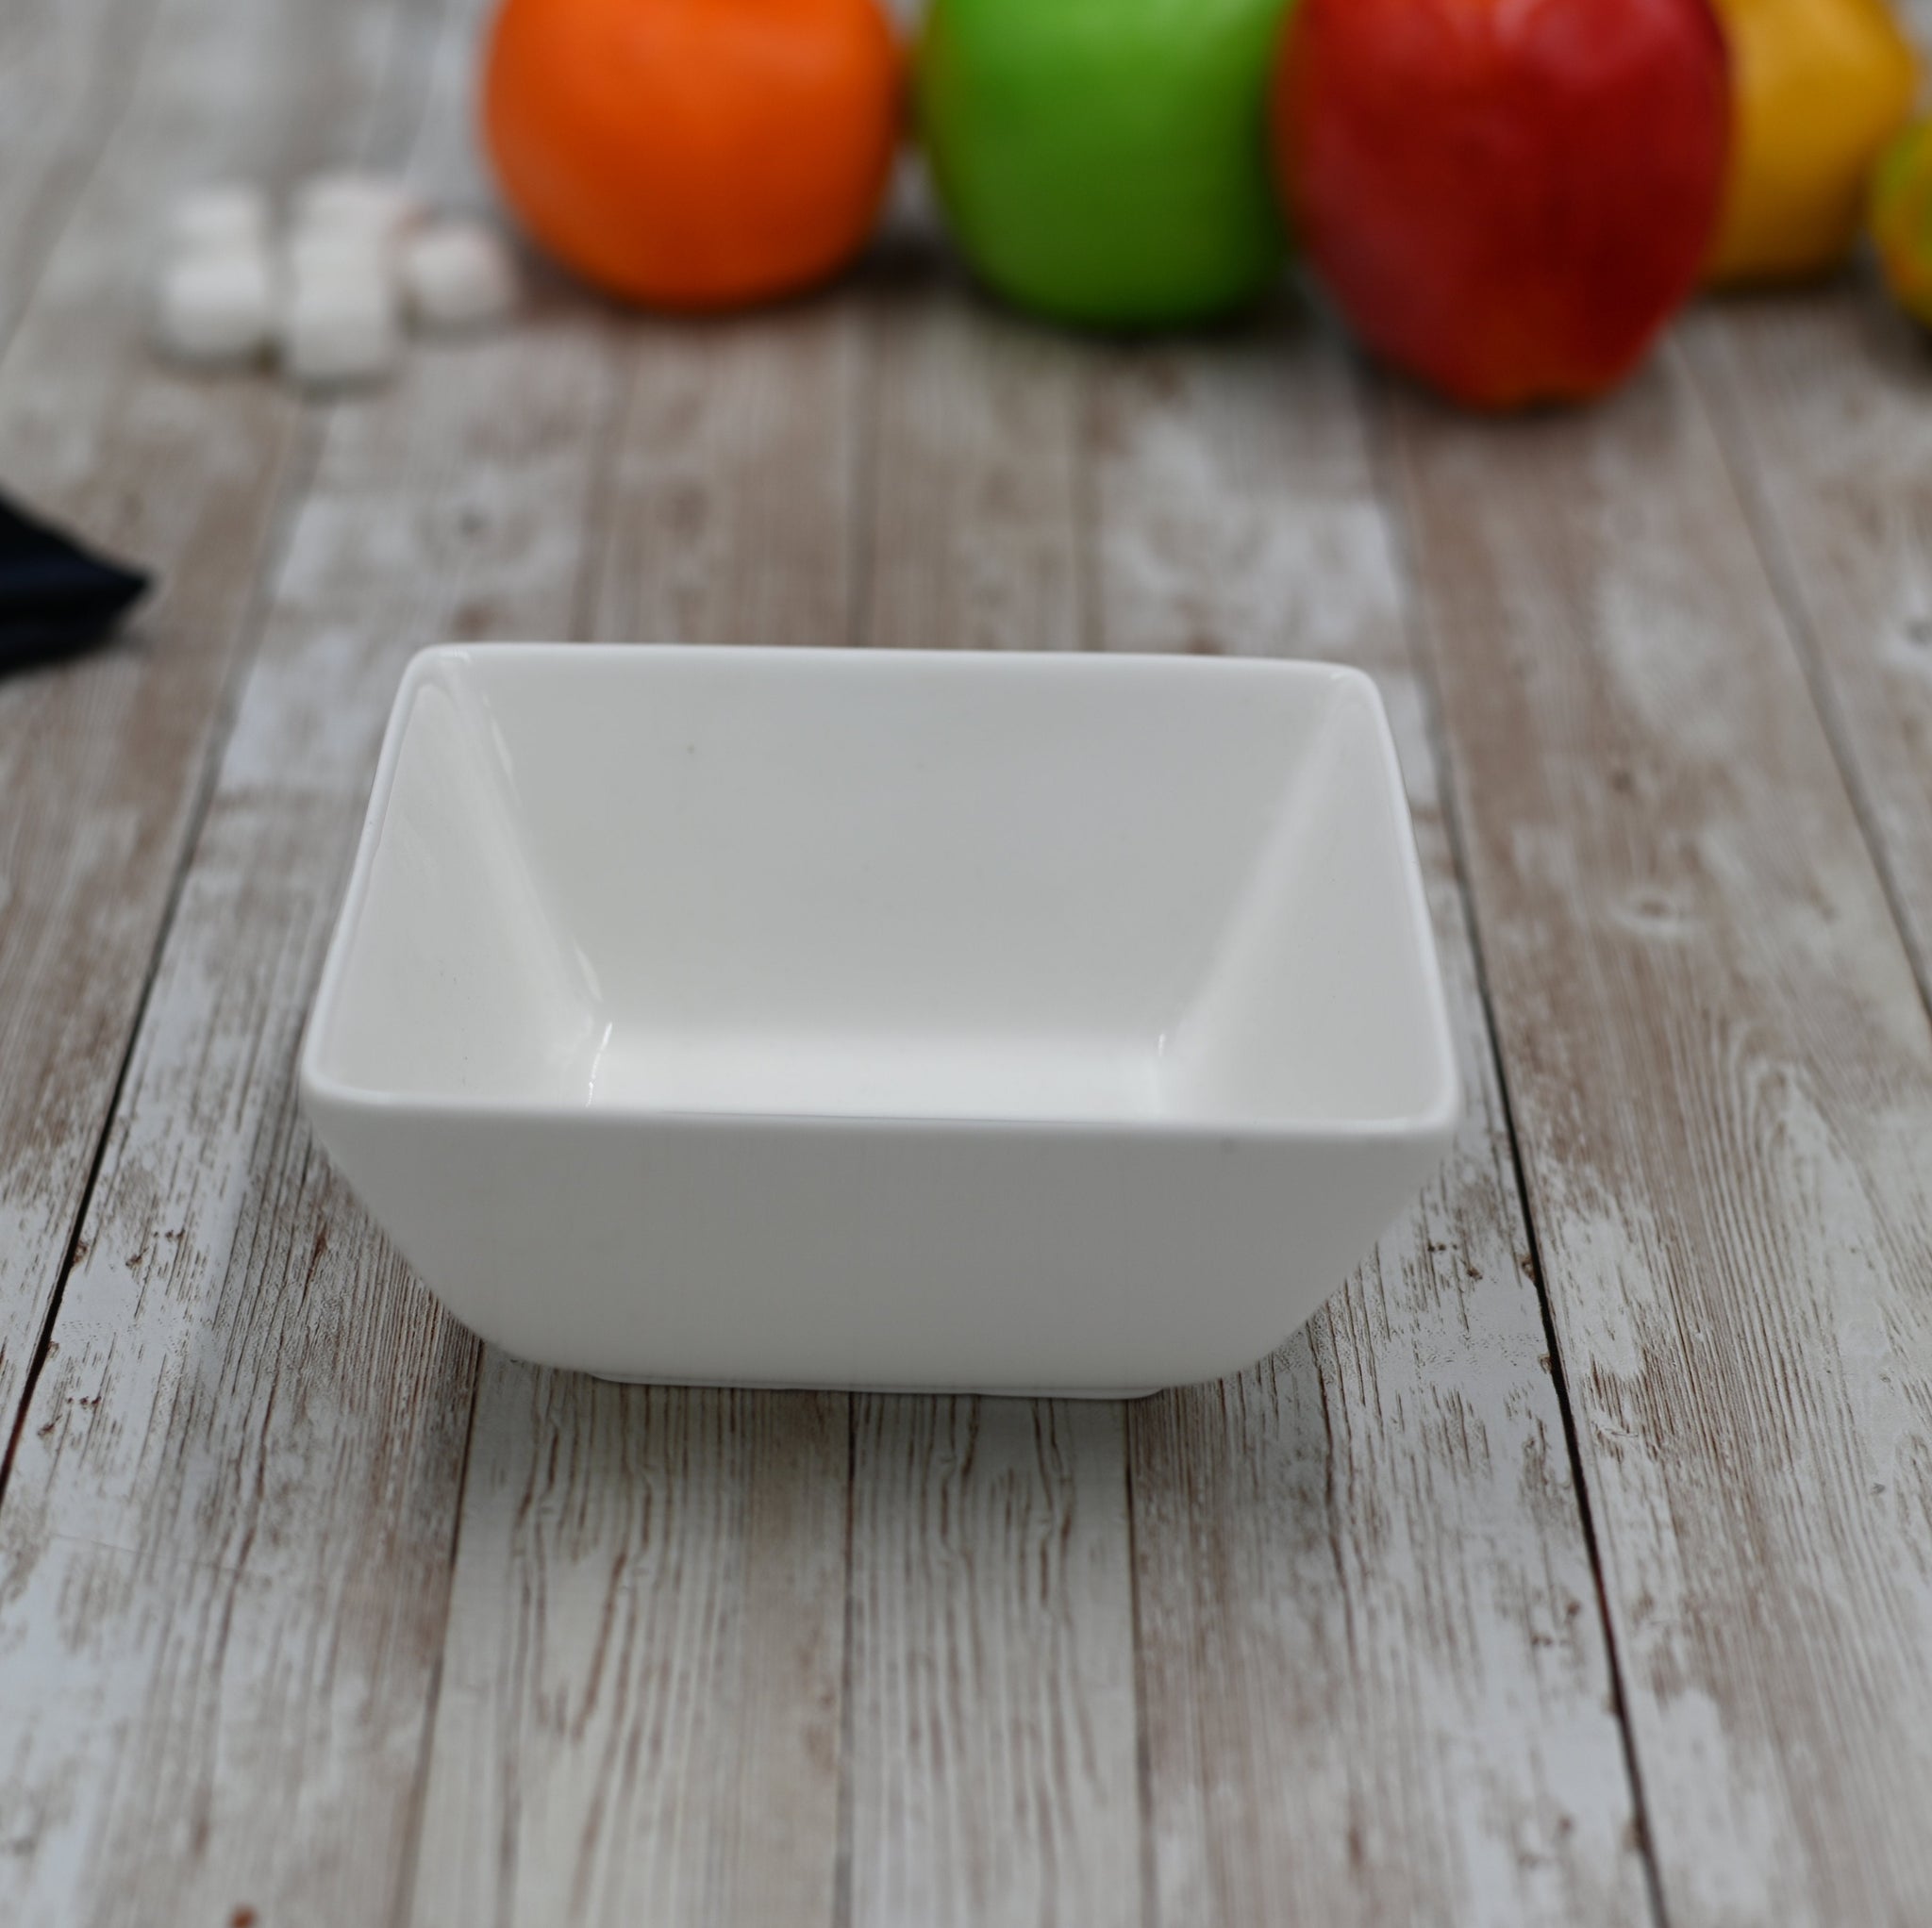 Set Of 6 White Square Snack / Sauce Dish 4.75" inch X 4.5" inch X 2.5" inch |11 Fl Oz by Wilmax Porcelain